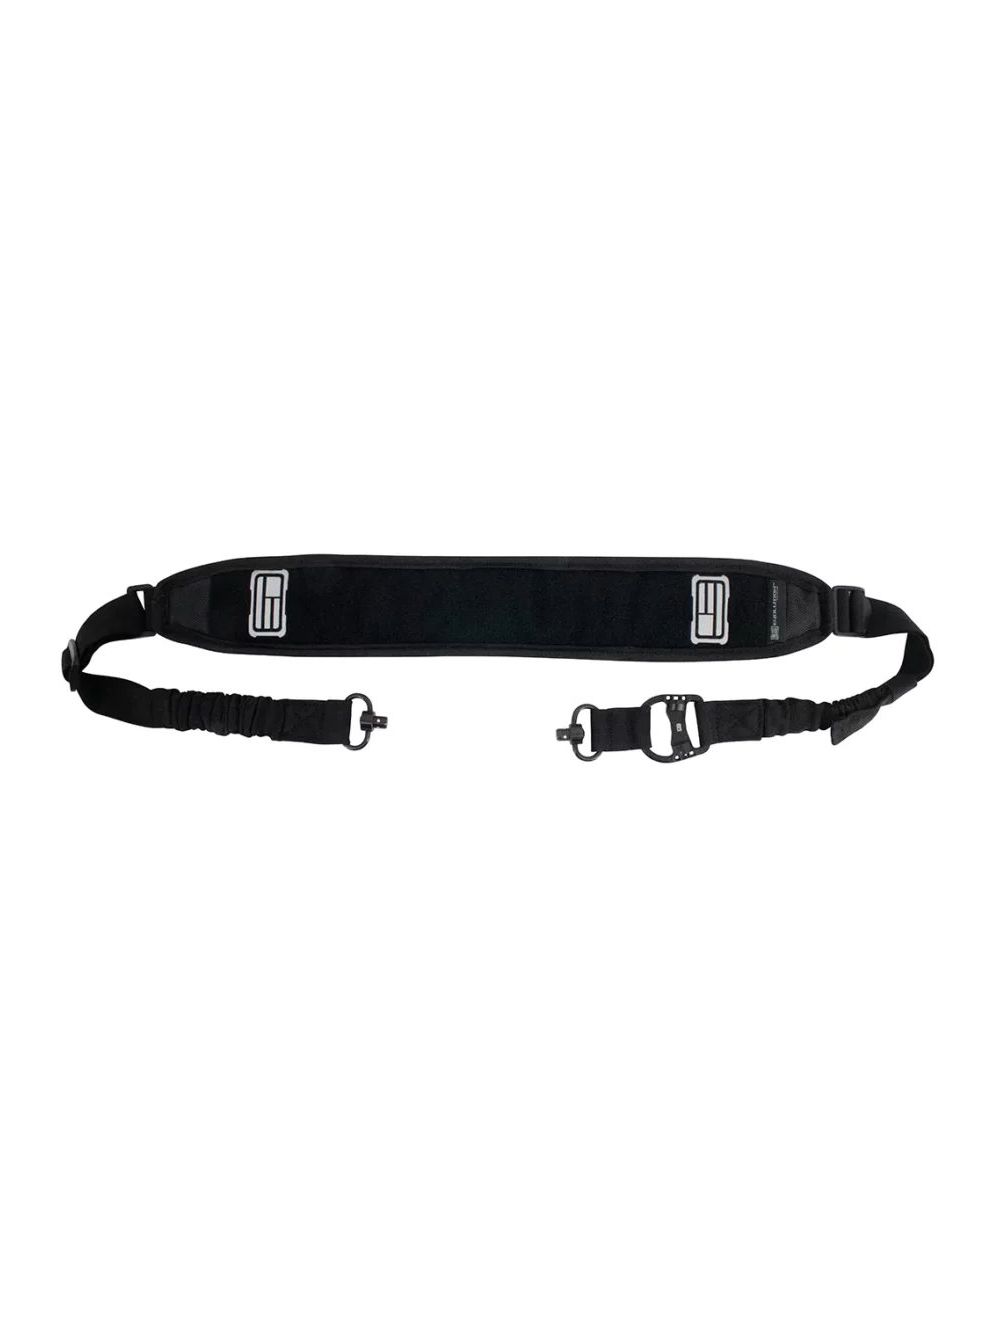 Tactical Rifle Sling